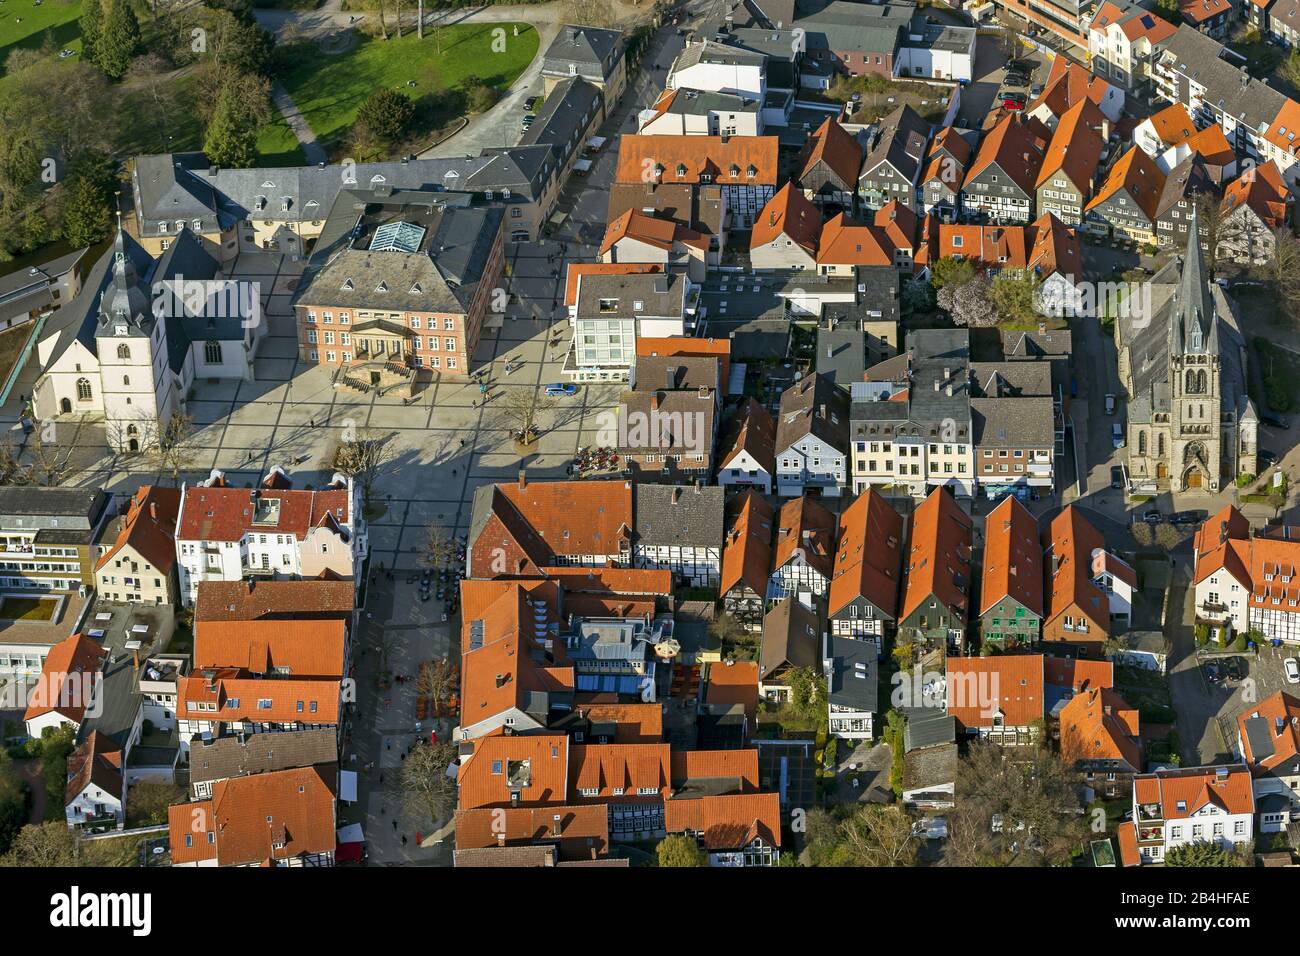 , city centre of Detmold with church Erloeserkirche and townhall at Marktplatz, Martin-Luther-Kirche, 22.04.2013, aerial view, Germany, North Rhine-Westphalia, Detmold Stock Photo